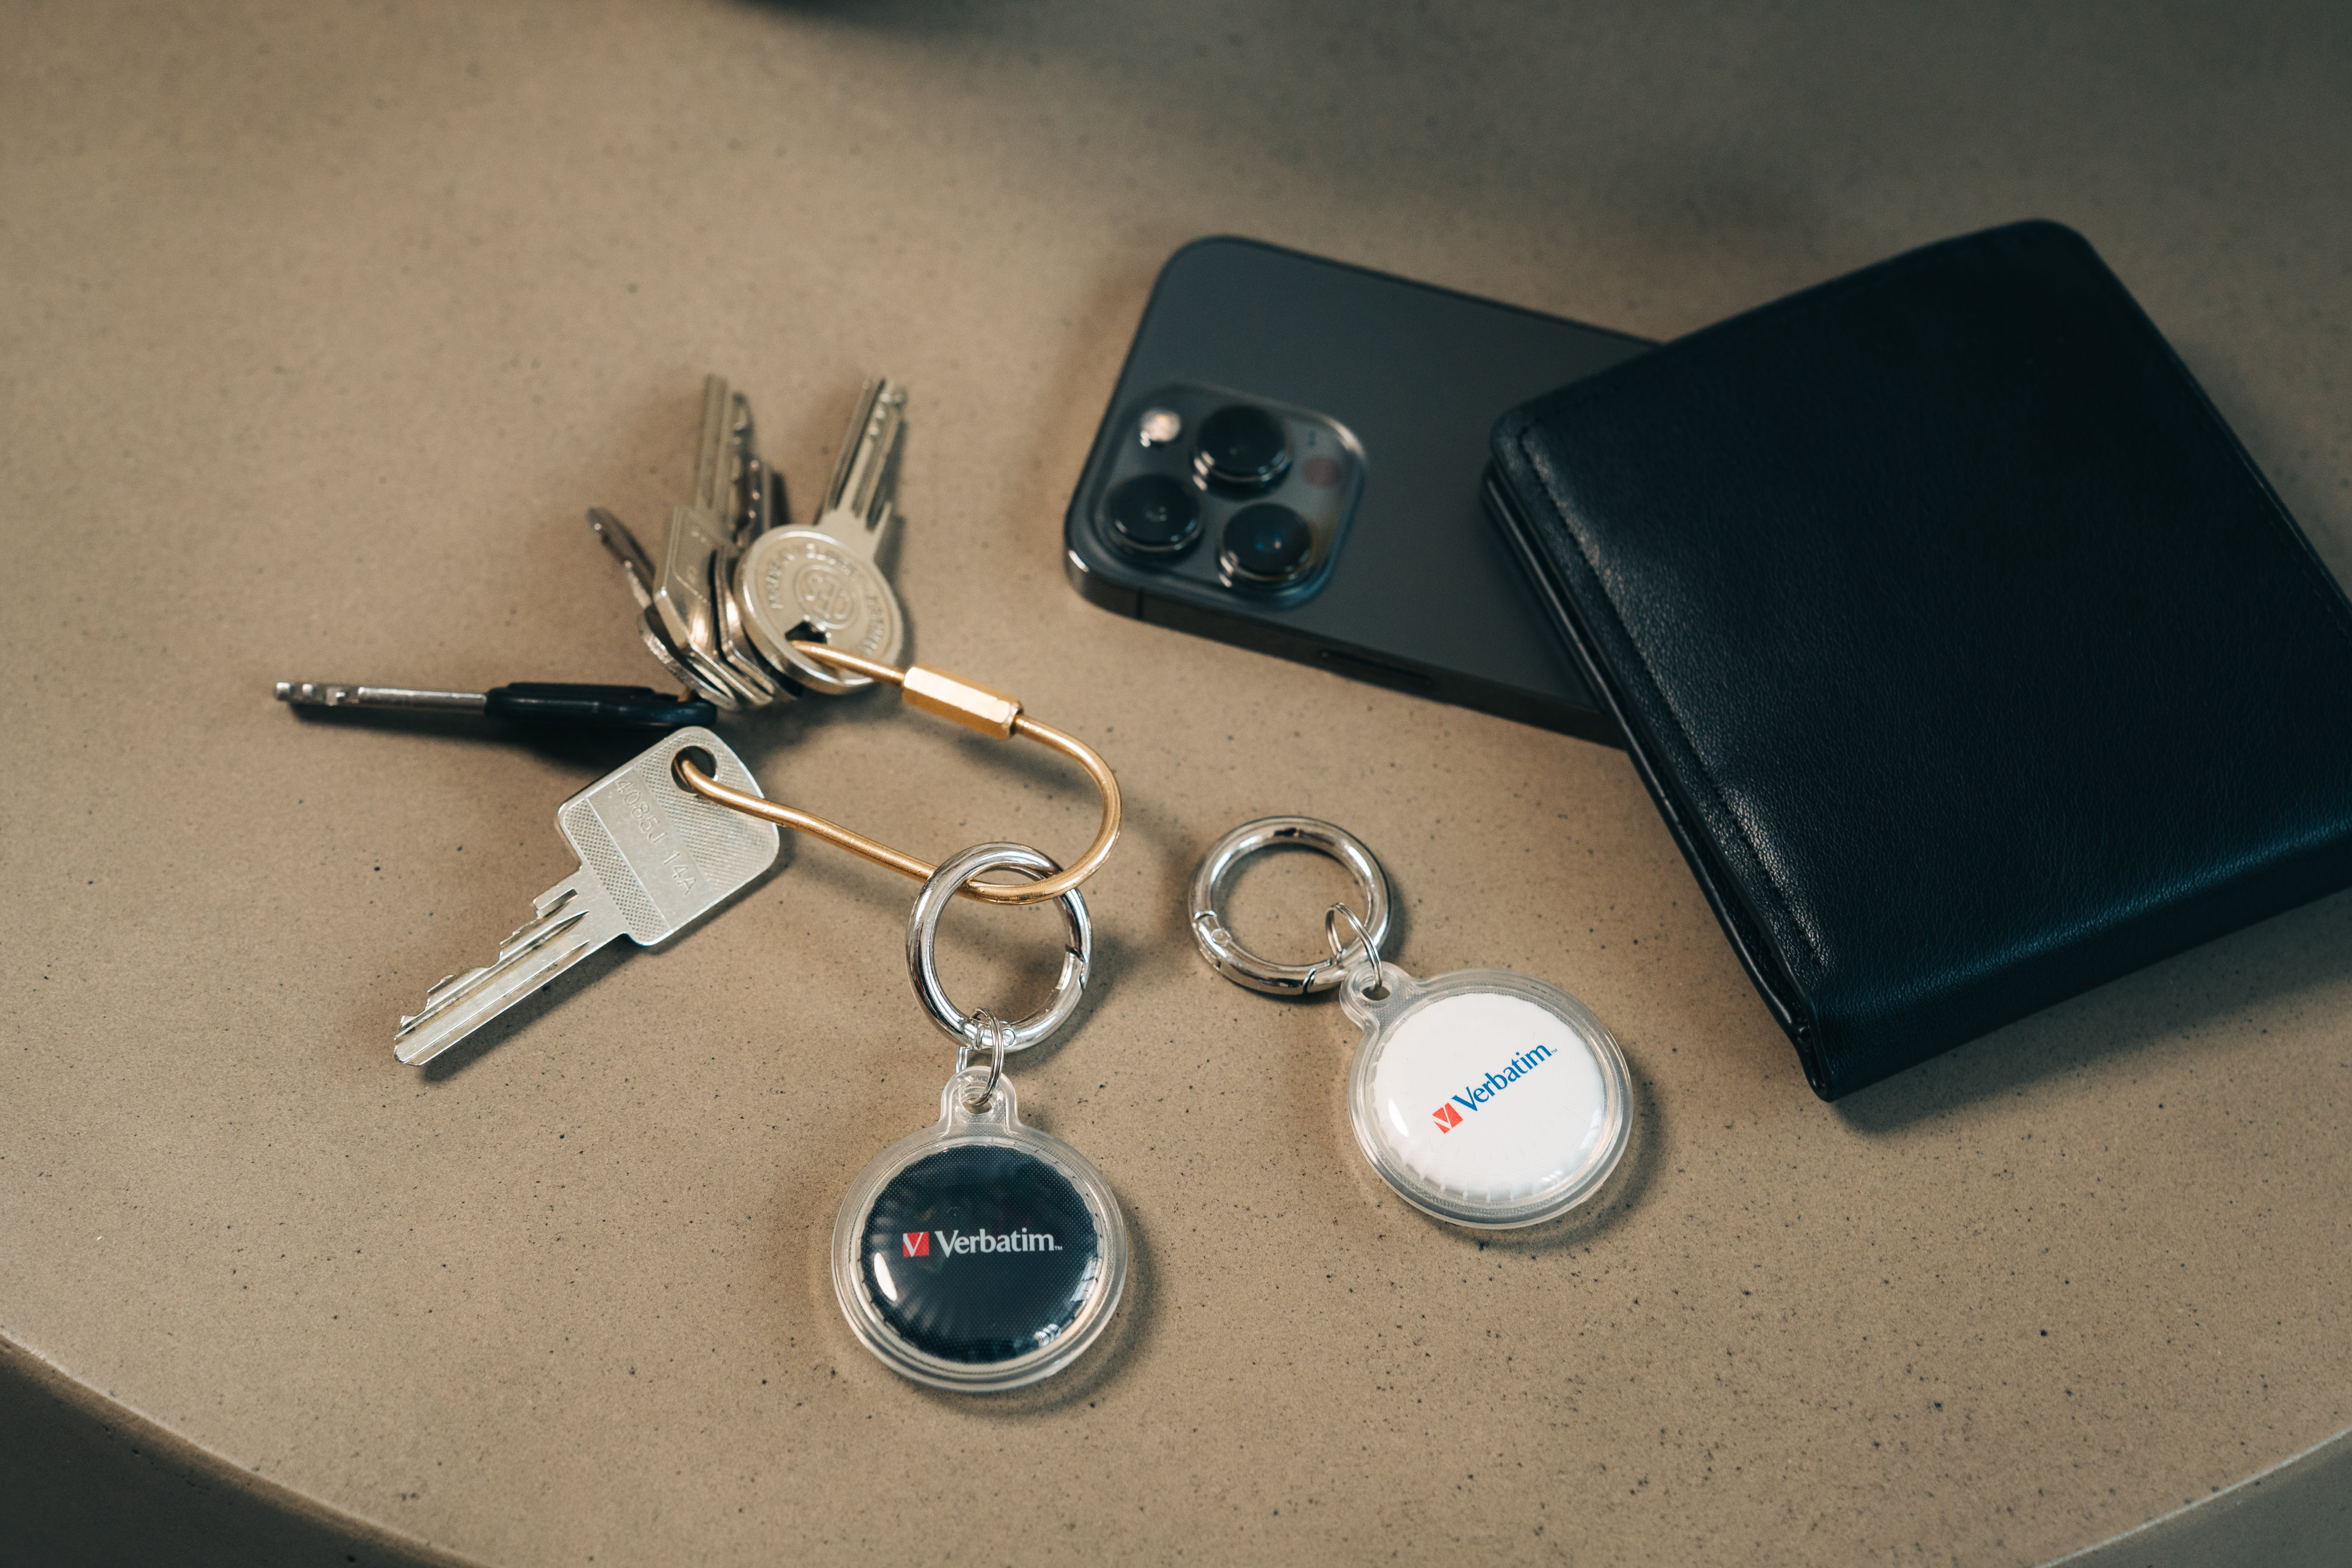 My Finder Coin Bluetooth Tracker - 2 pack